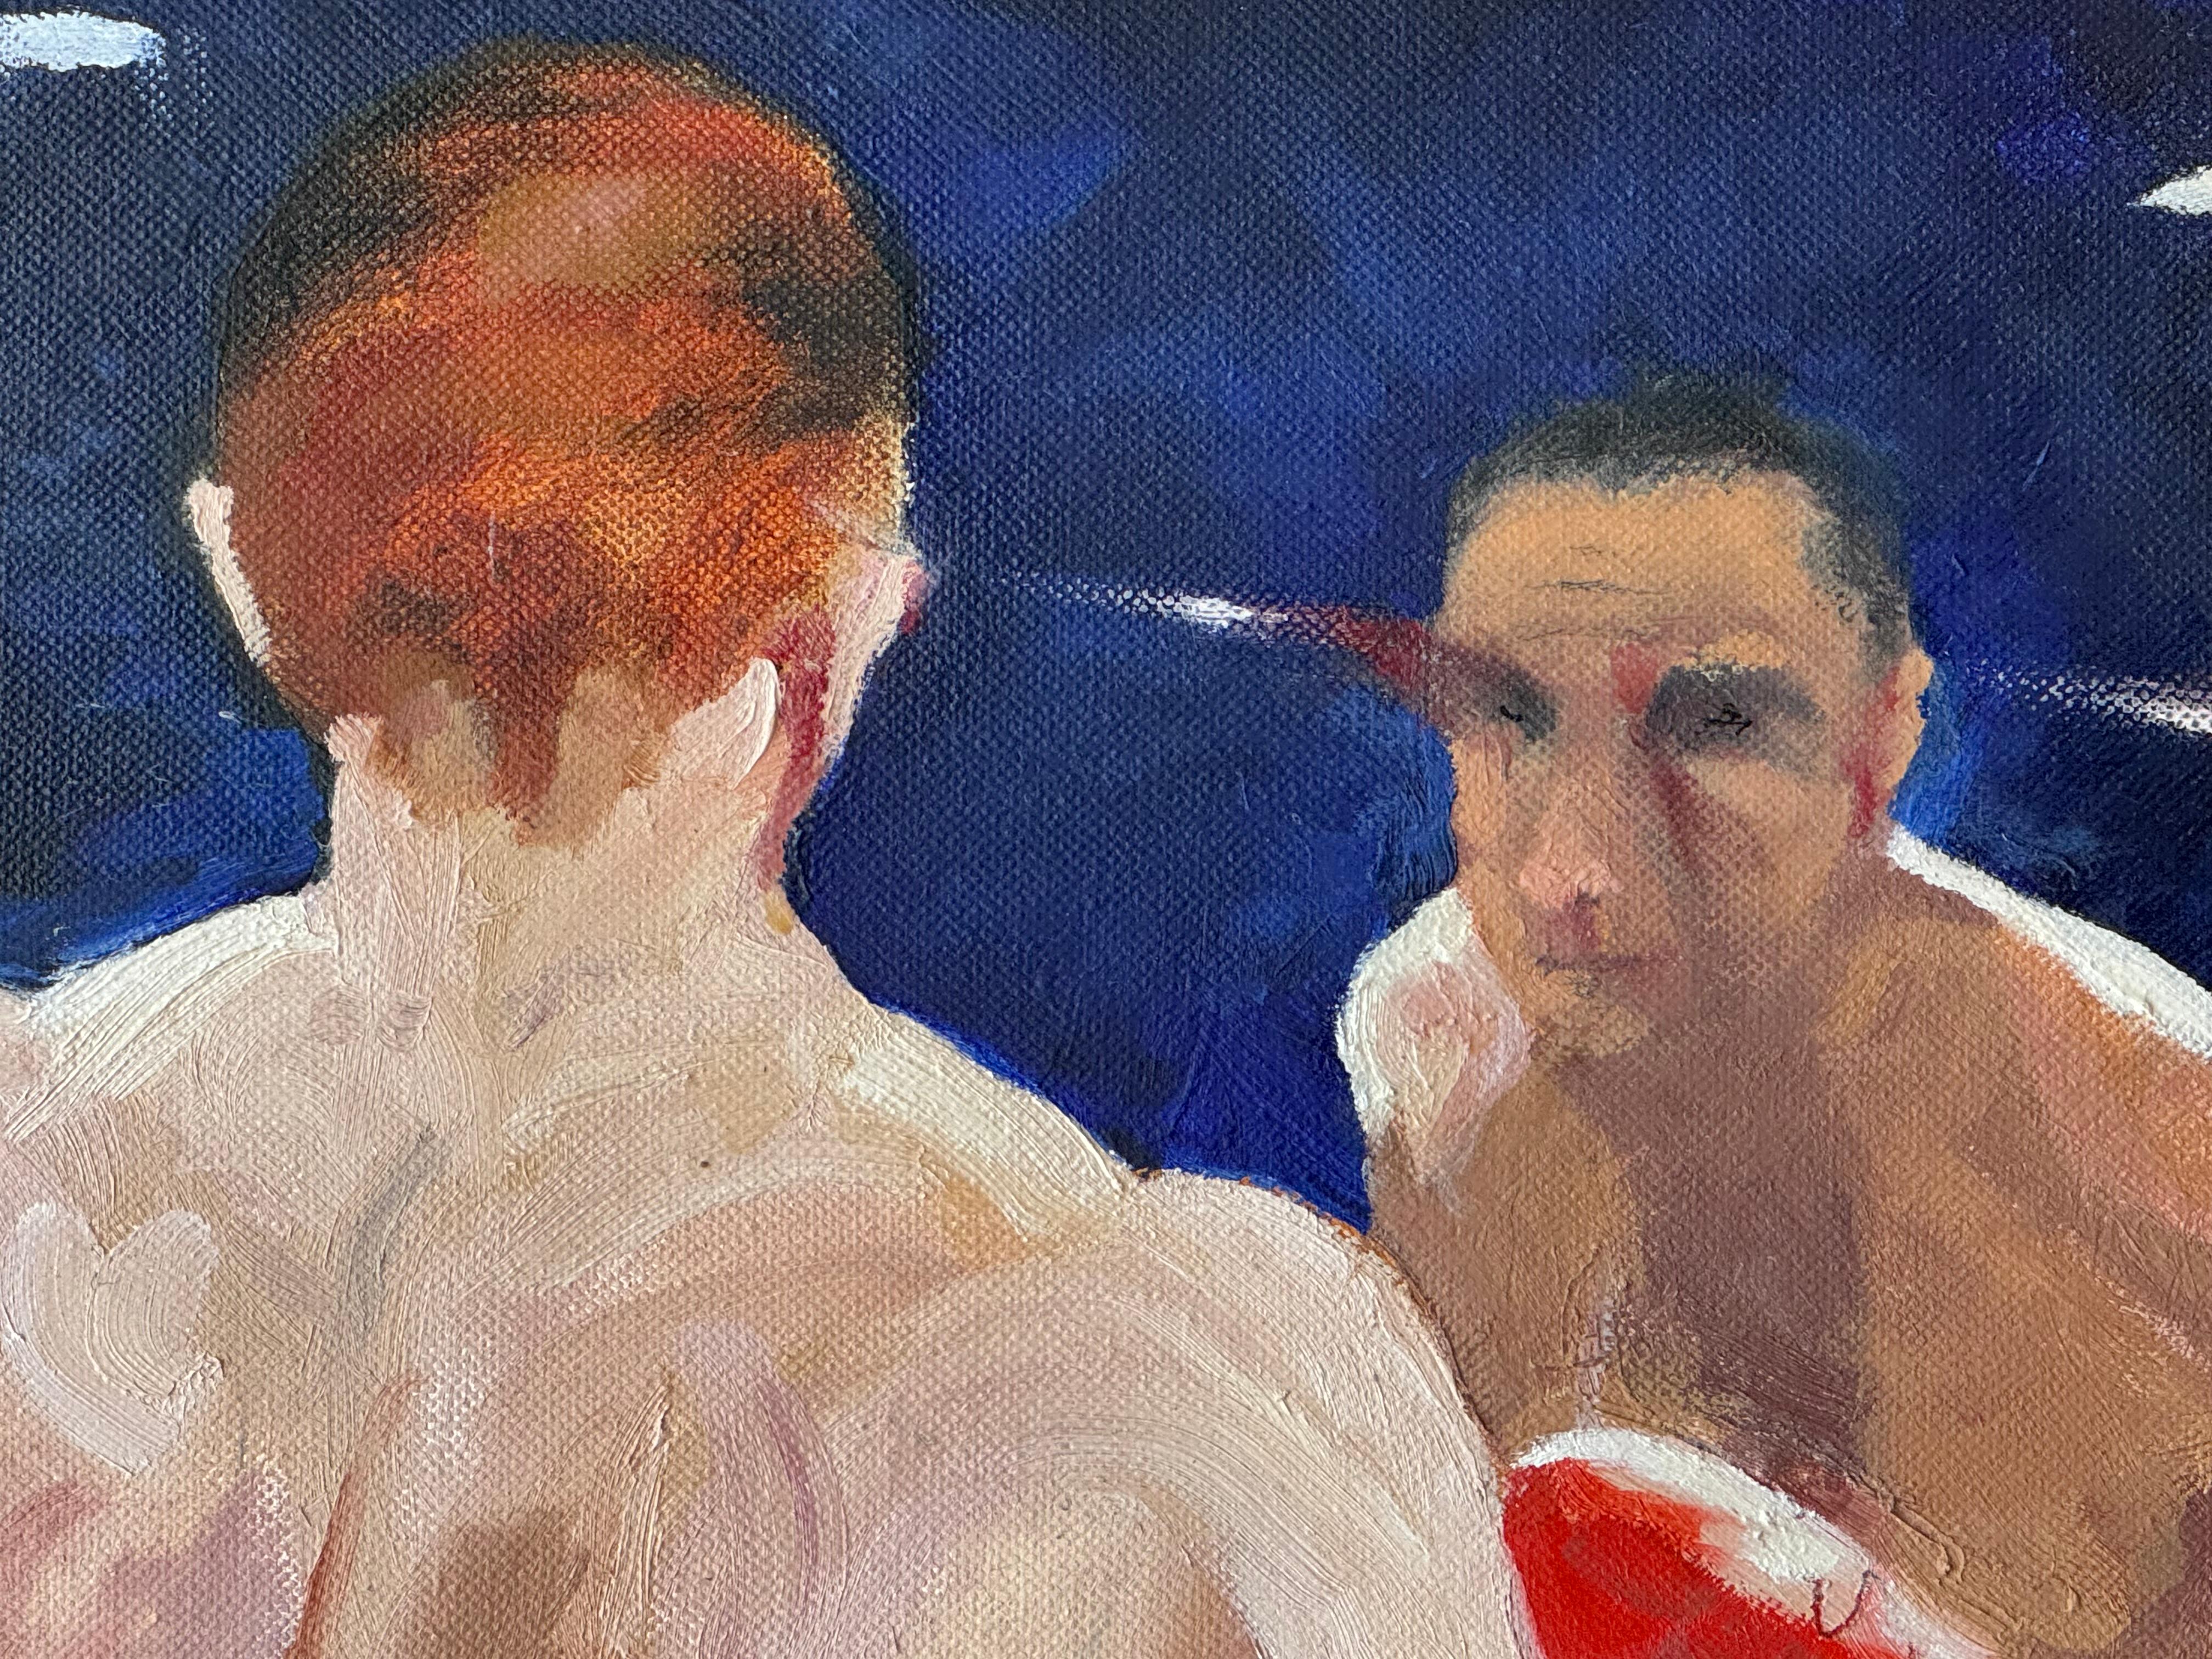 painting the boxer